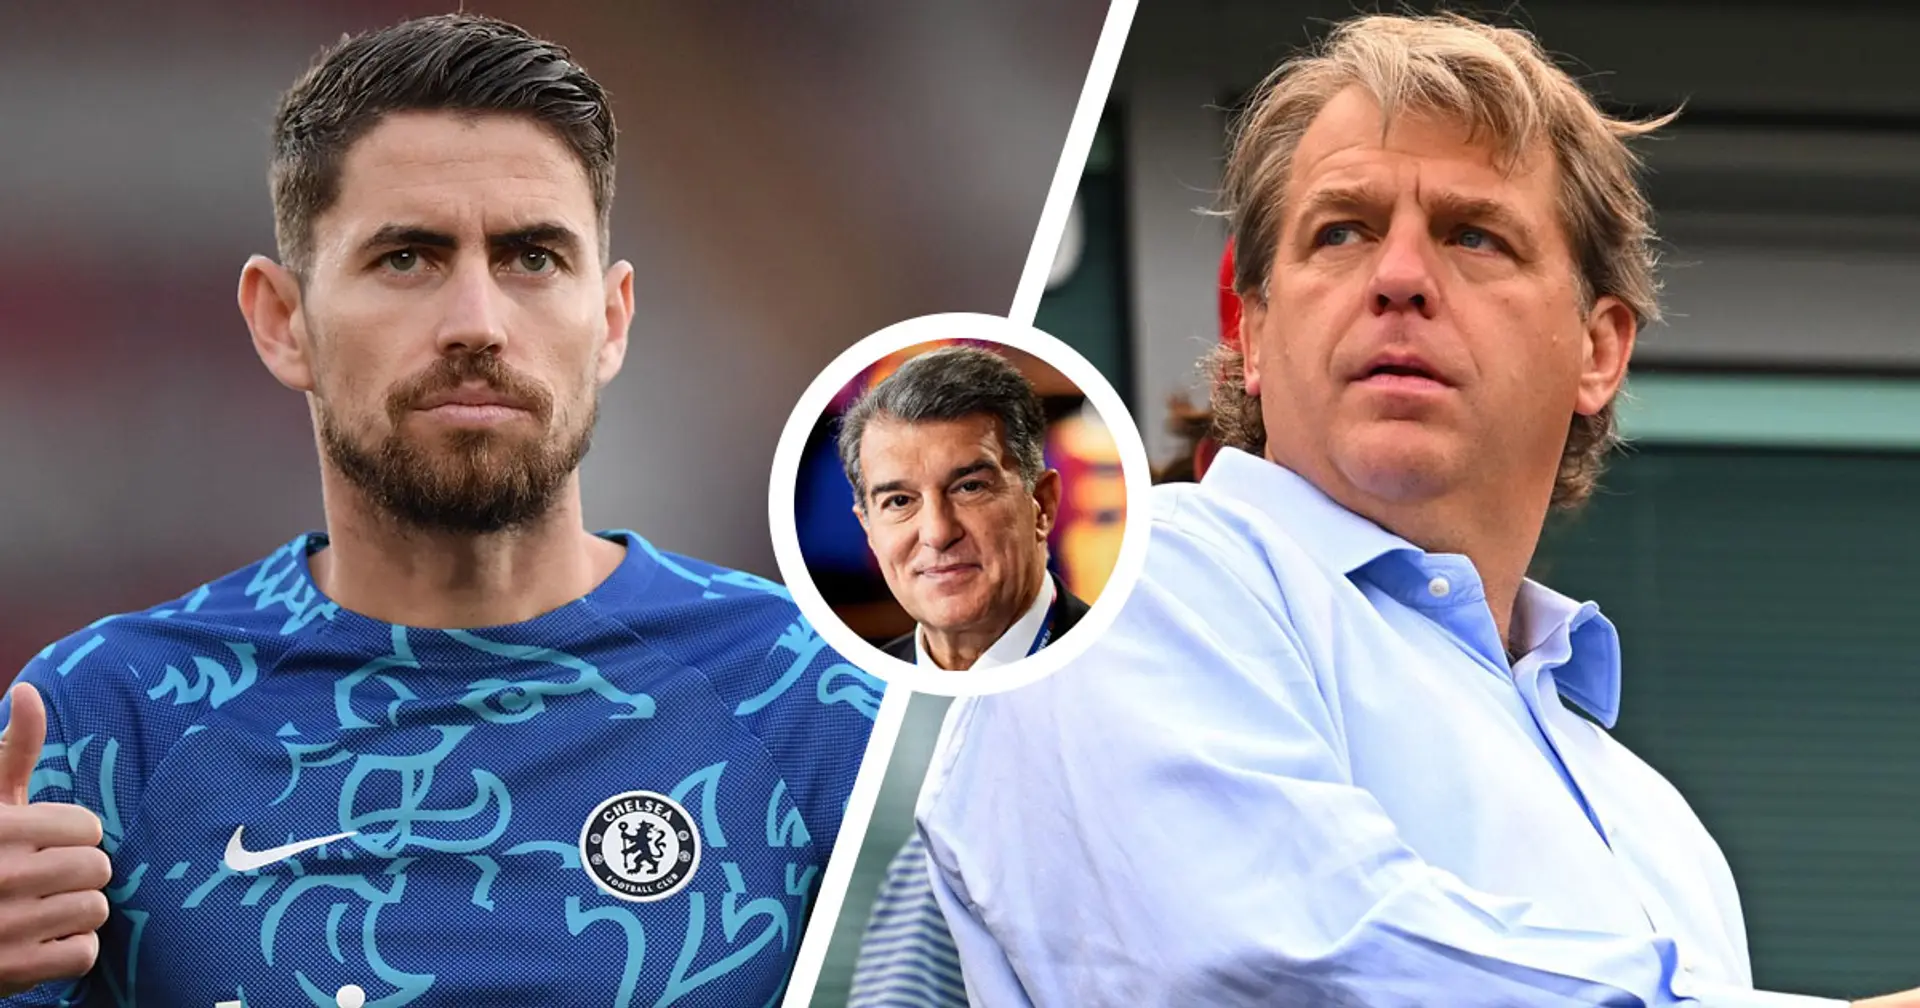 Jorginho 'far away’ from new Chelsea contract after €13.6m wage demand - Barca's stance explained